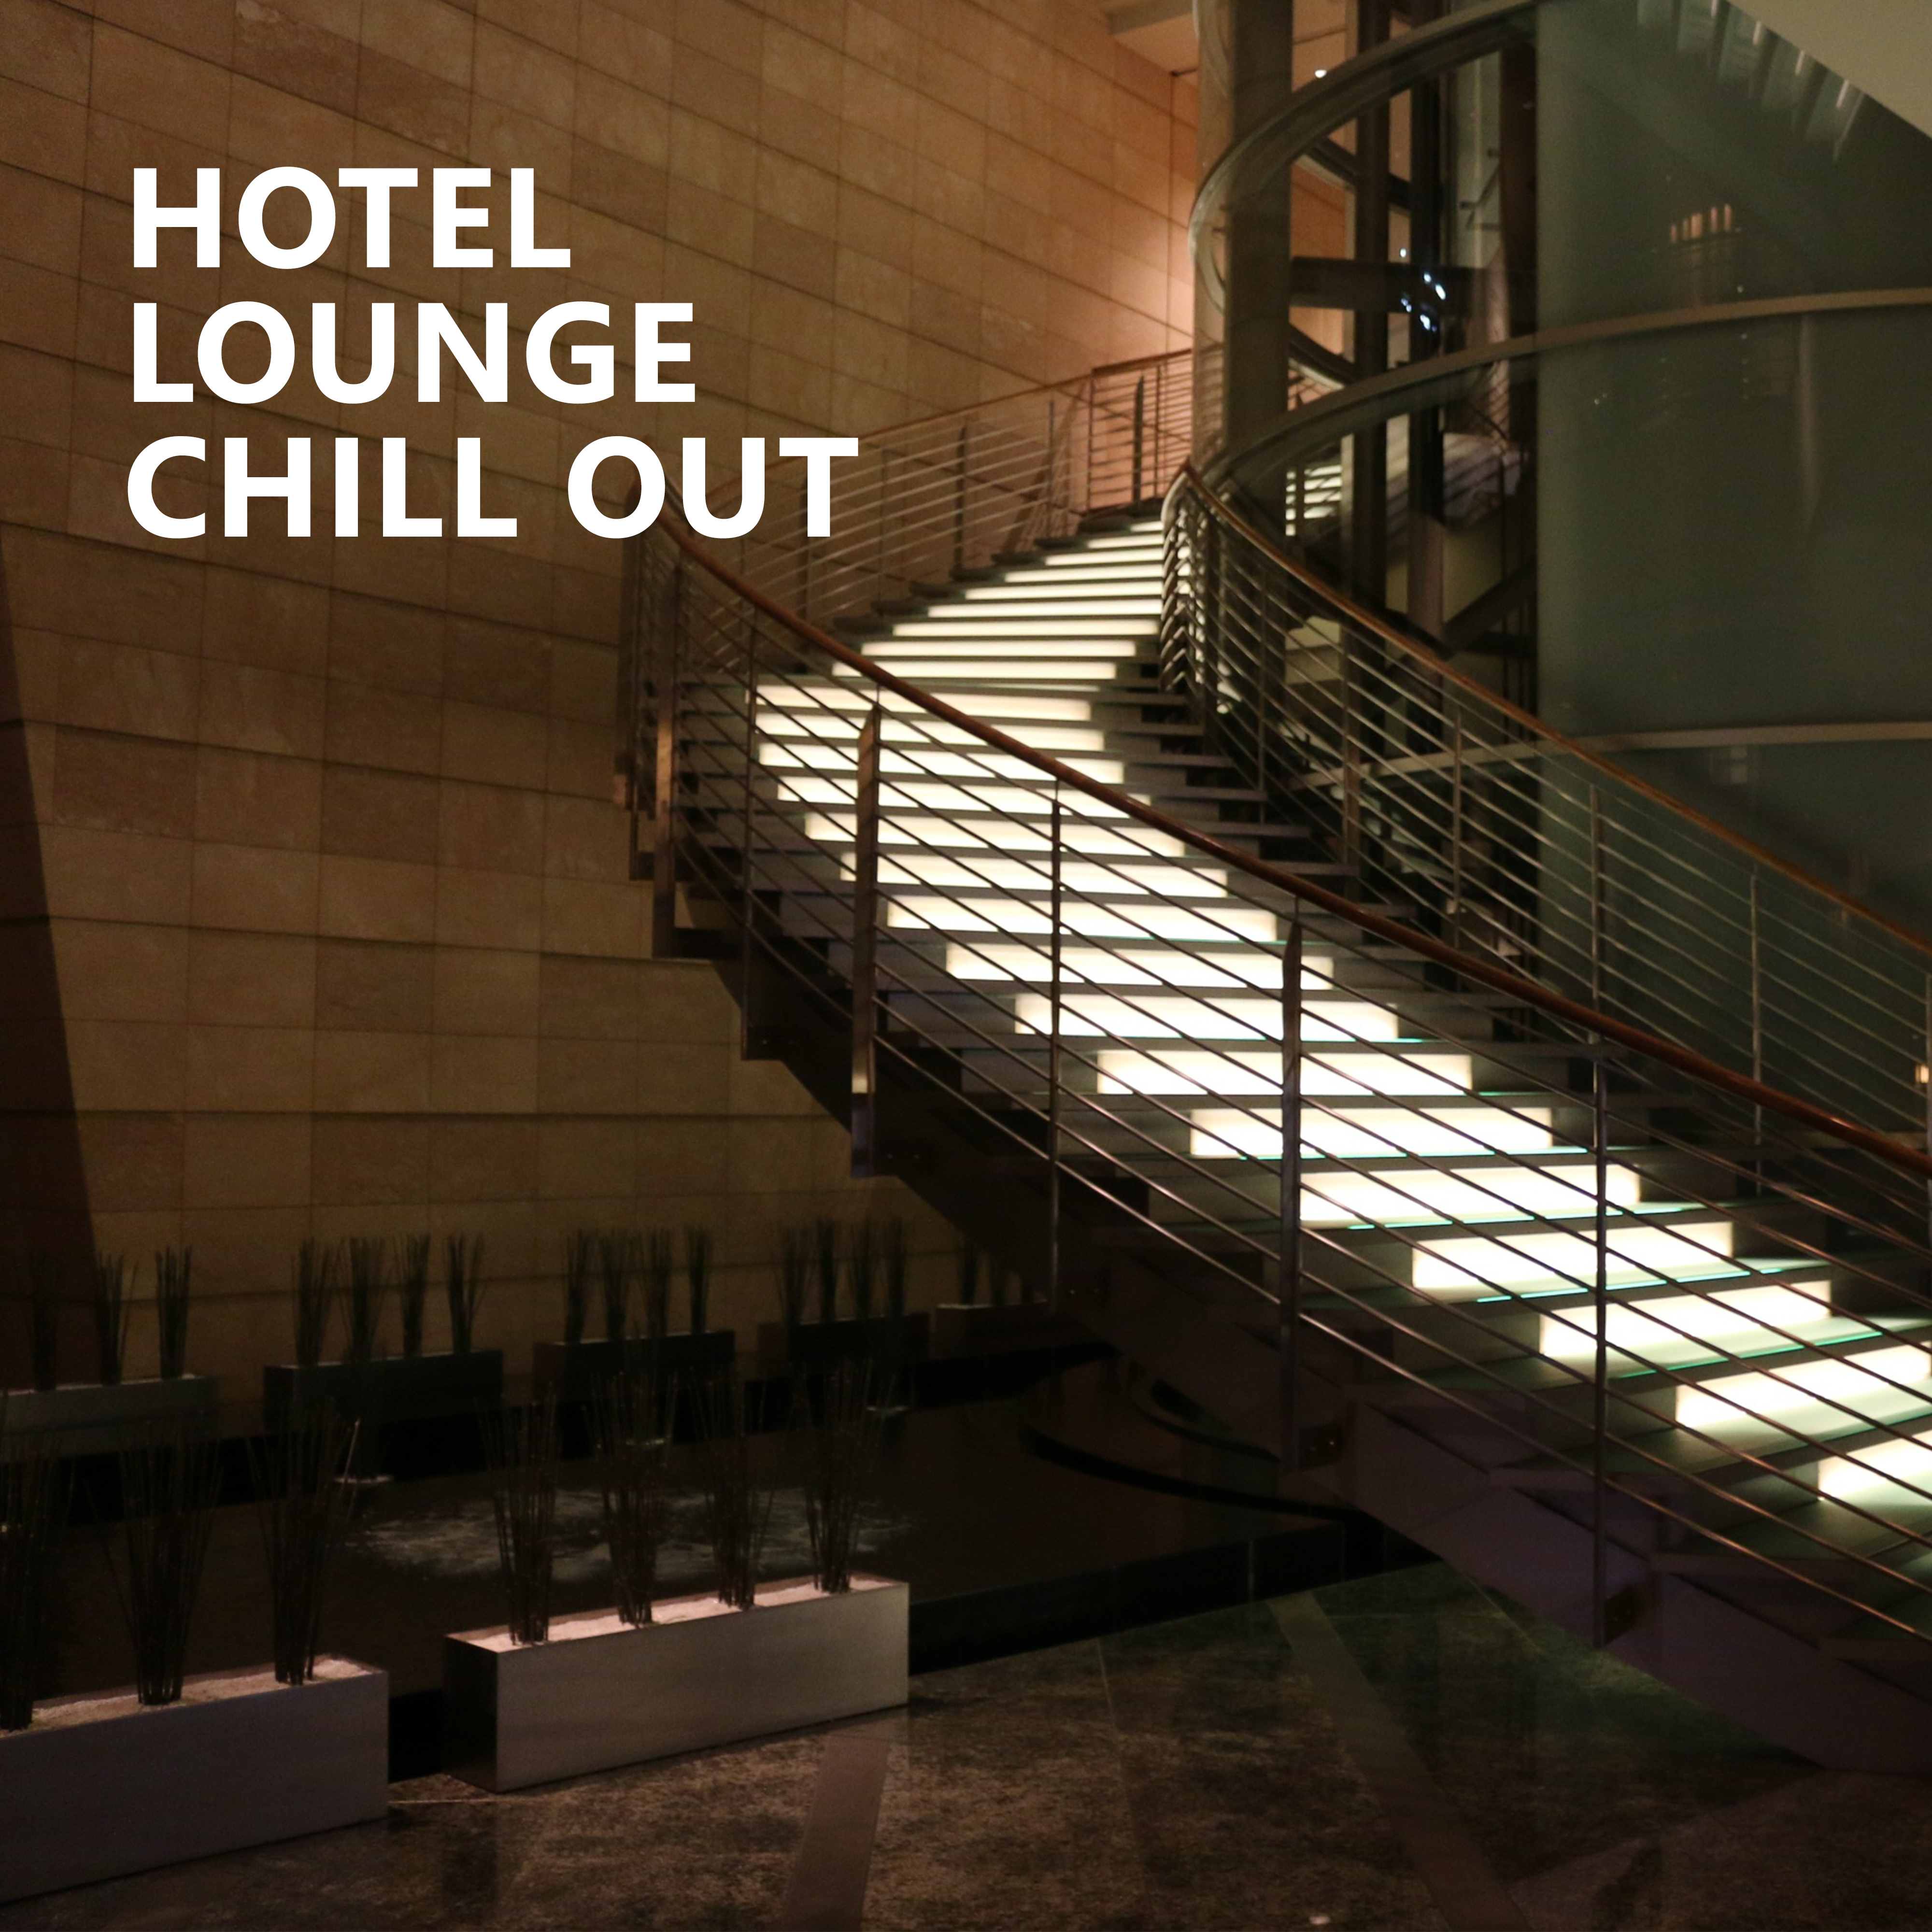 Hotel Lounge Chill Out – Easy Listening, Stress Relief, Chill Out Music, Holiday Journey, Peaceful Vibes